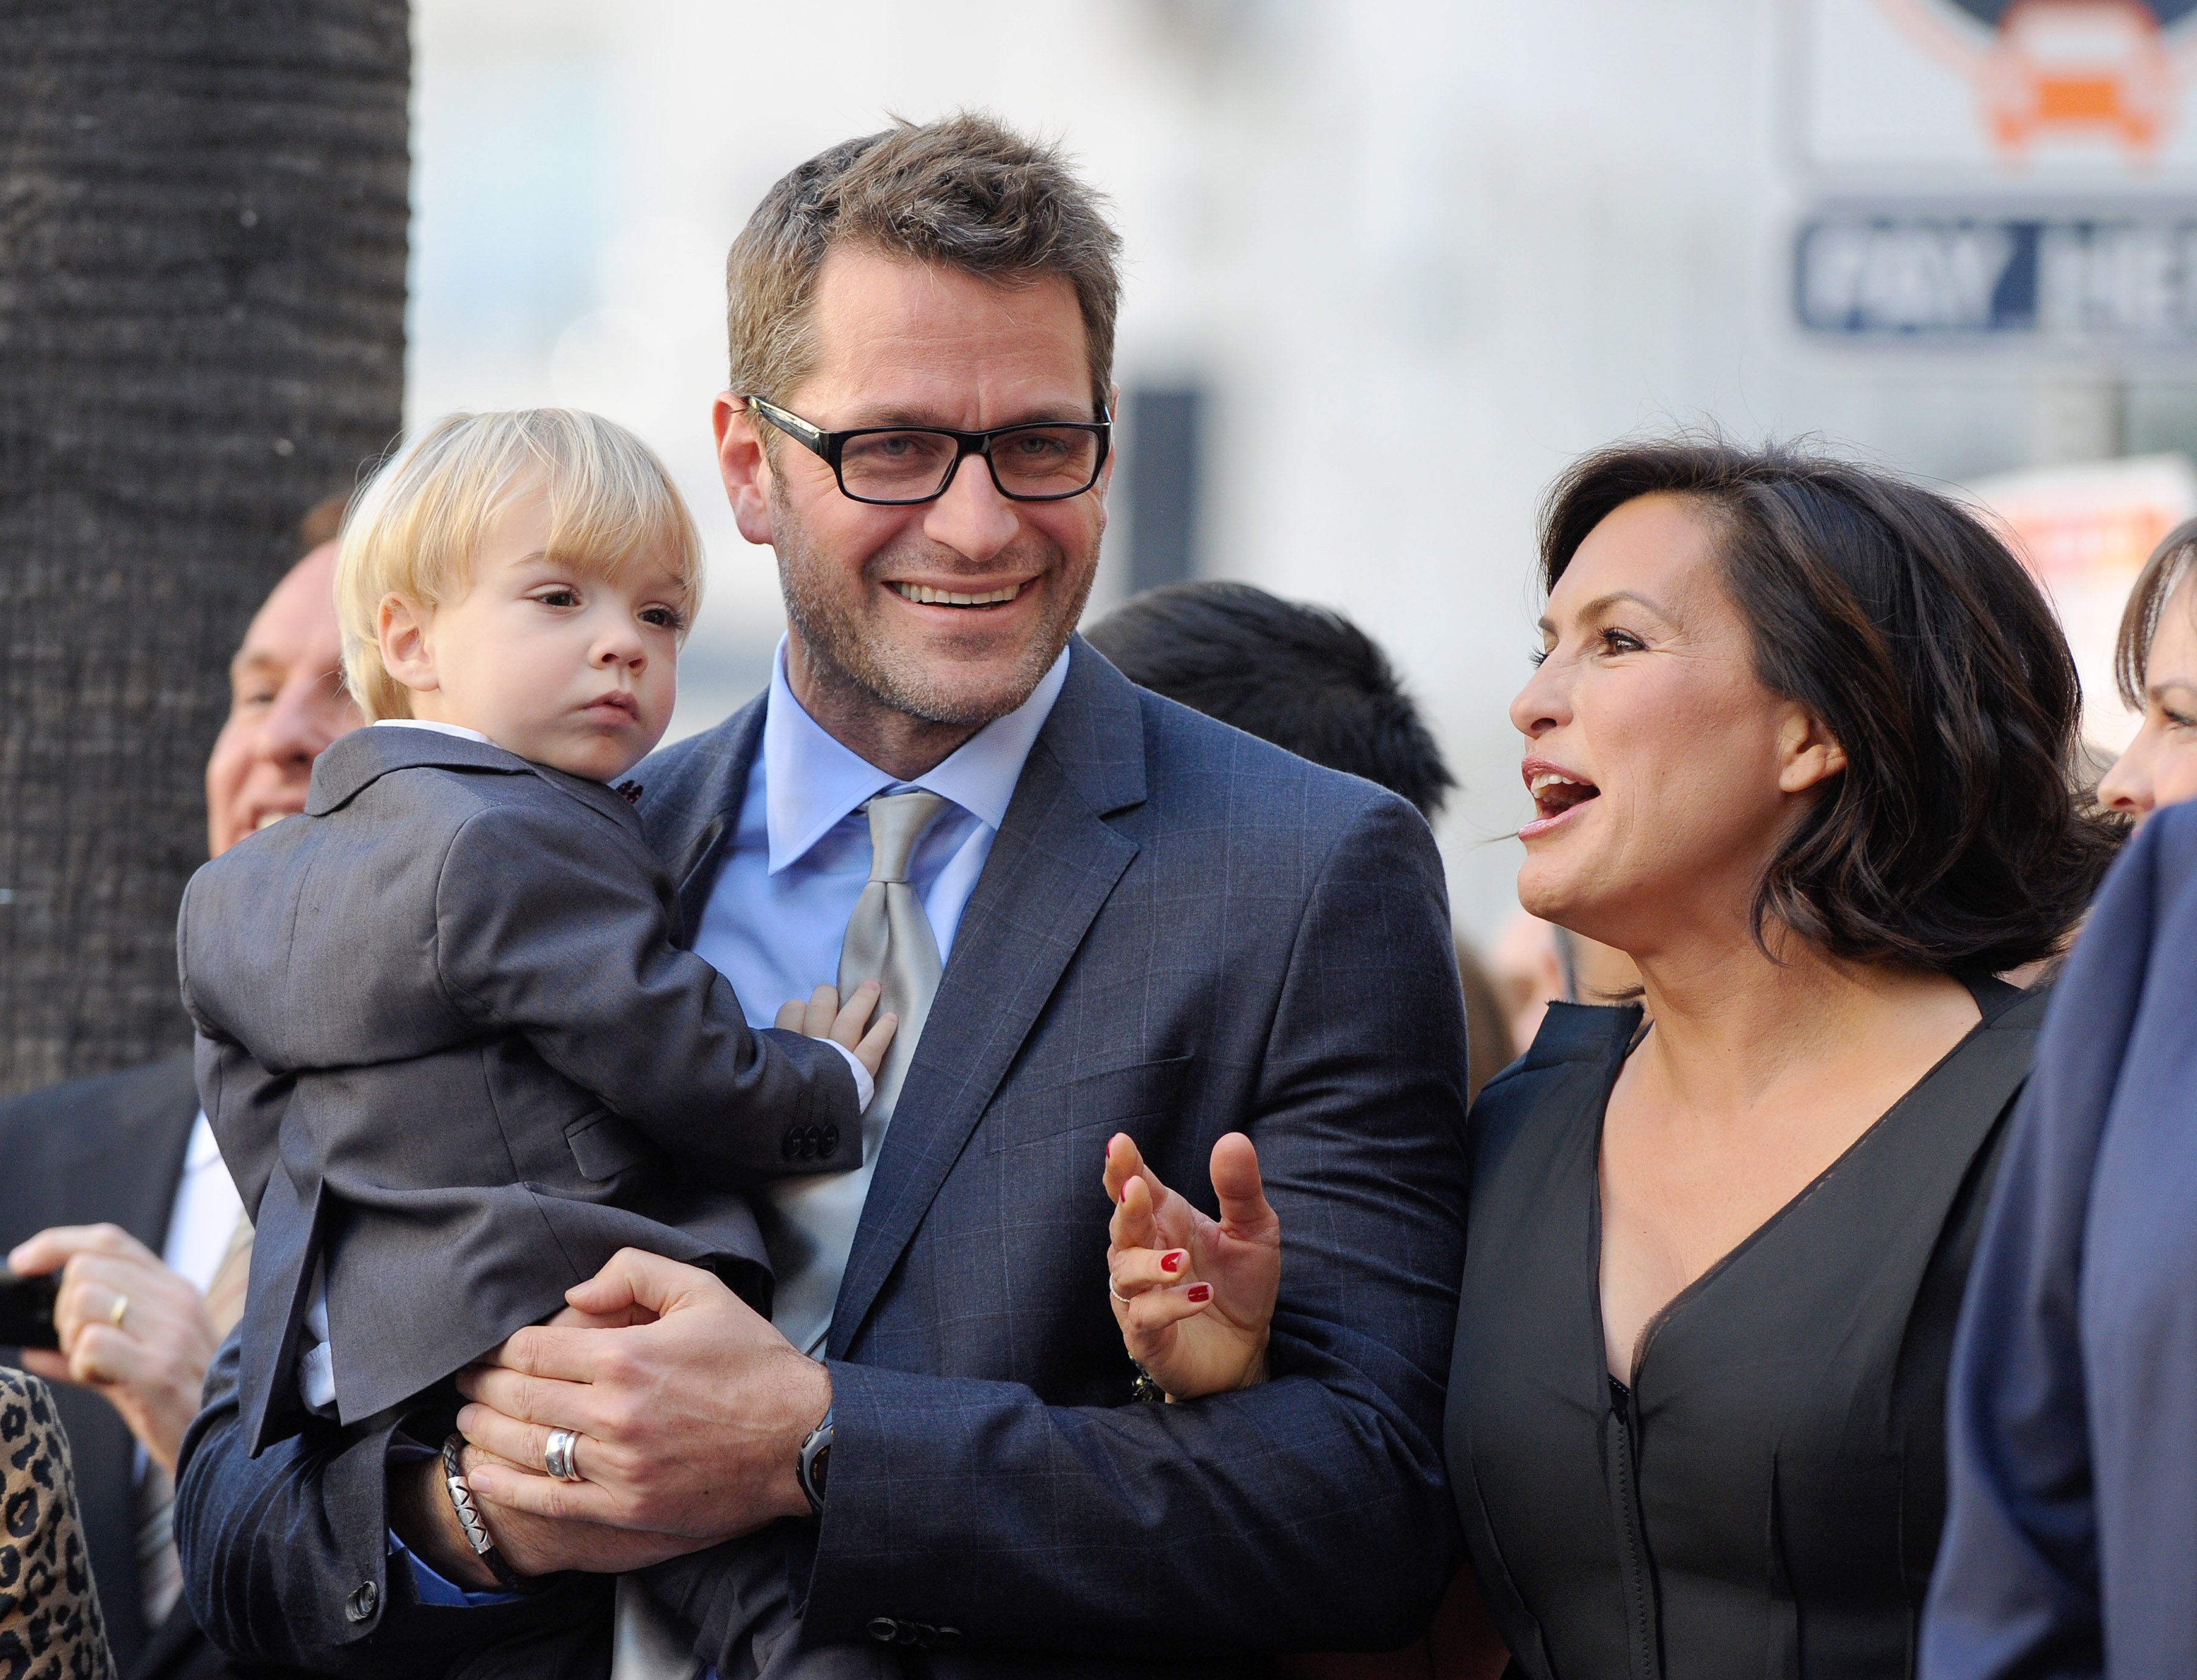 Mariska Hargitay and Peter Hermann with son Andrew attend the ceremony honoring Mariska Hargitay with a Star on The Hollywood Walk of Fame on November 8, 2013, in Hollywood | Photo: Getty Images